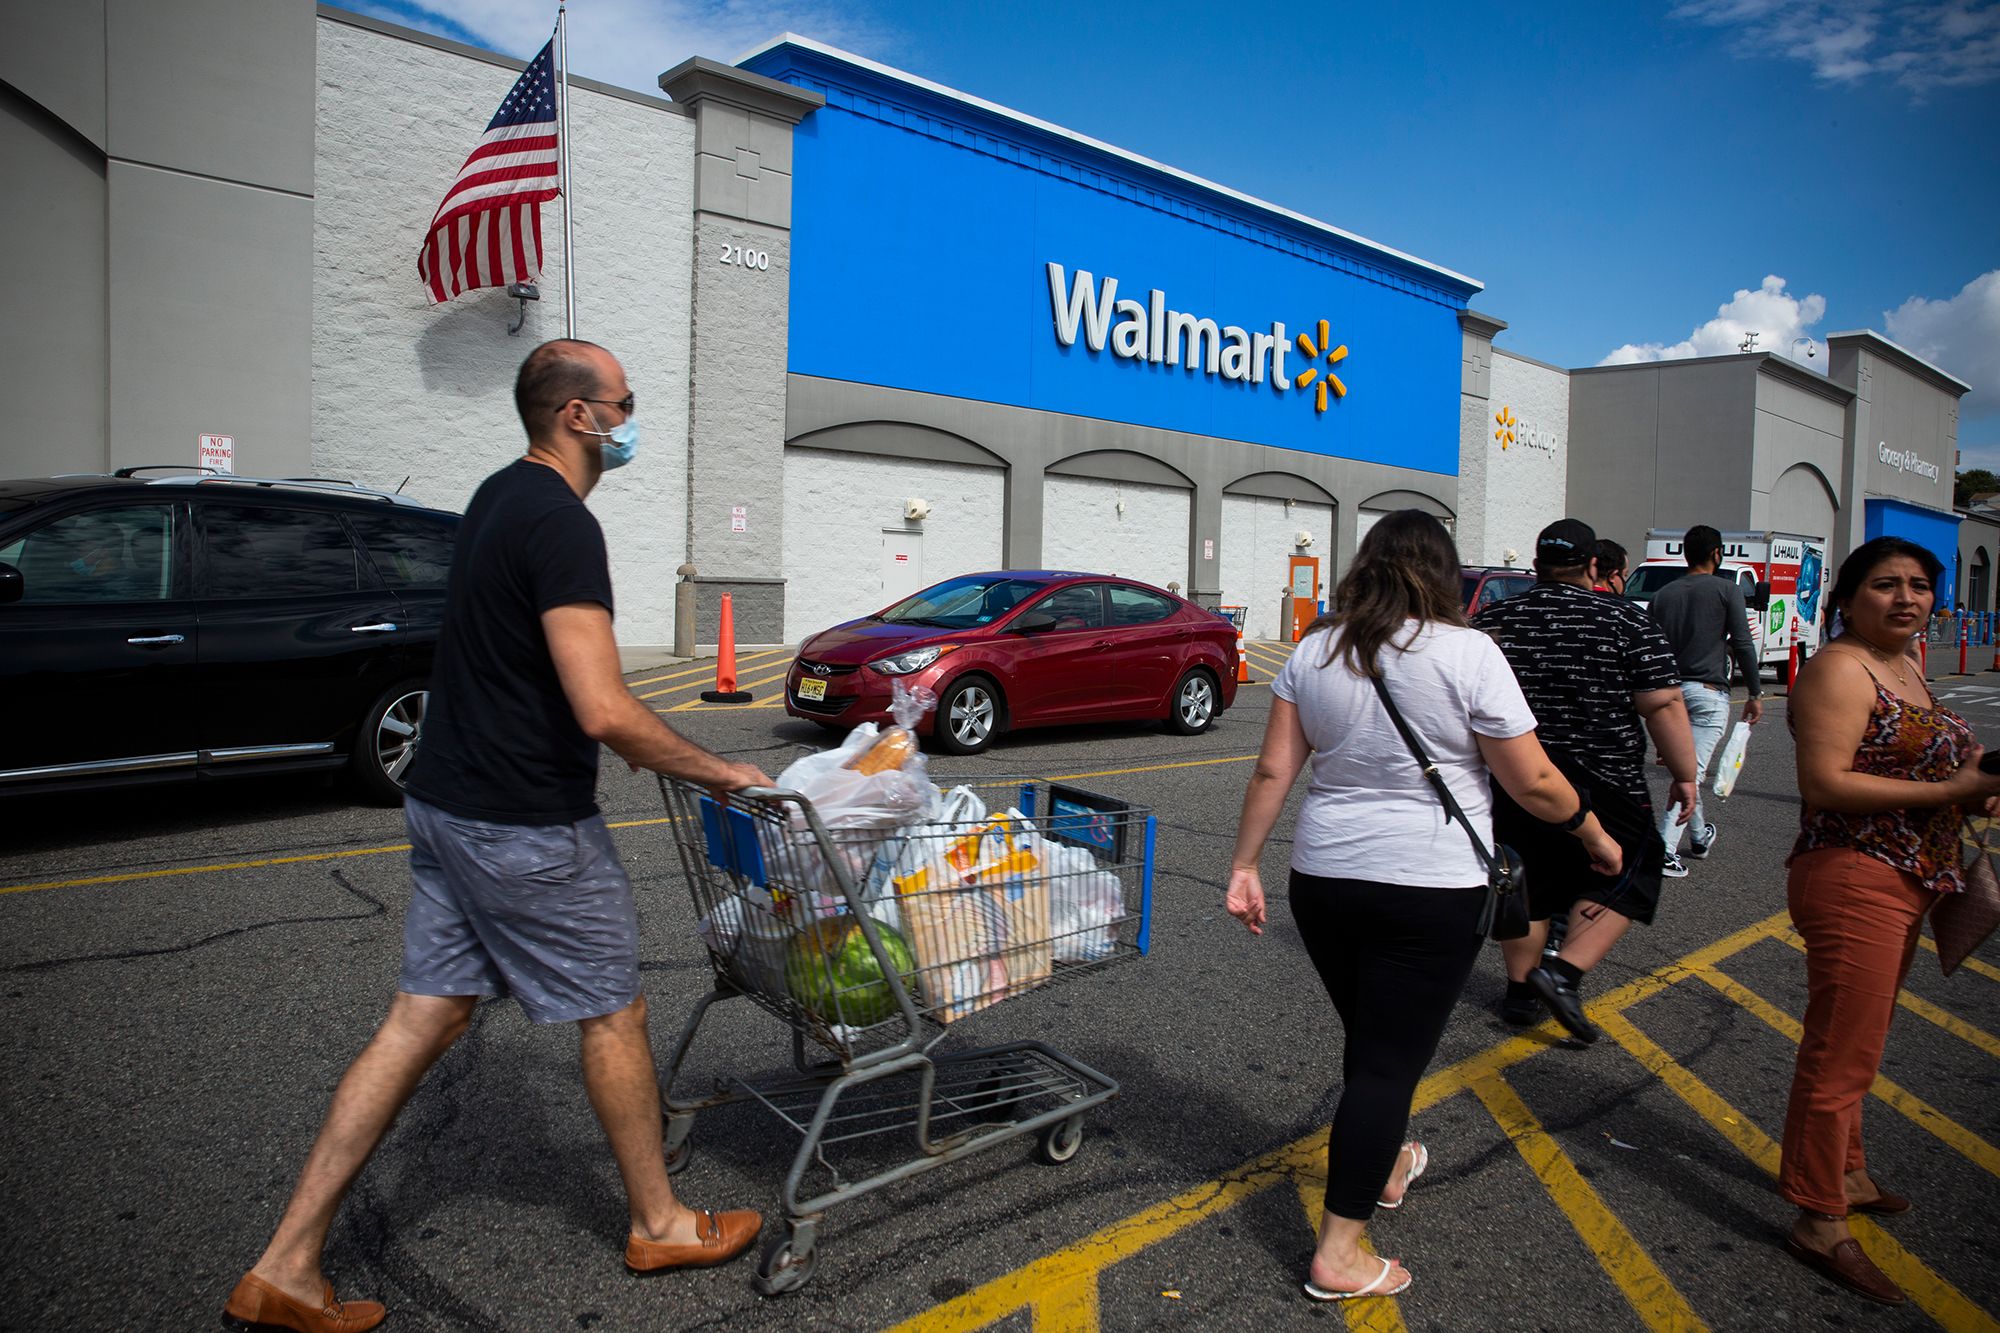 Miami, FL, USA - March 26, 2020: People Going In A Walmart Store On Sunny  Day. Walmart Is The World's Third Largest Public Corporation That Runs  Chains Of Department Stores. Quarantine Due